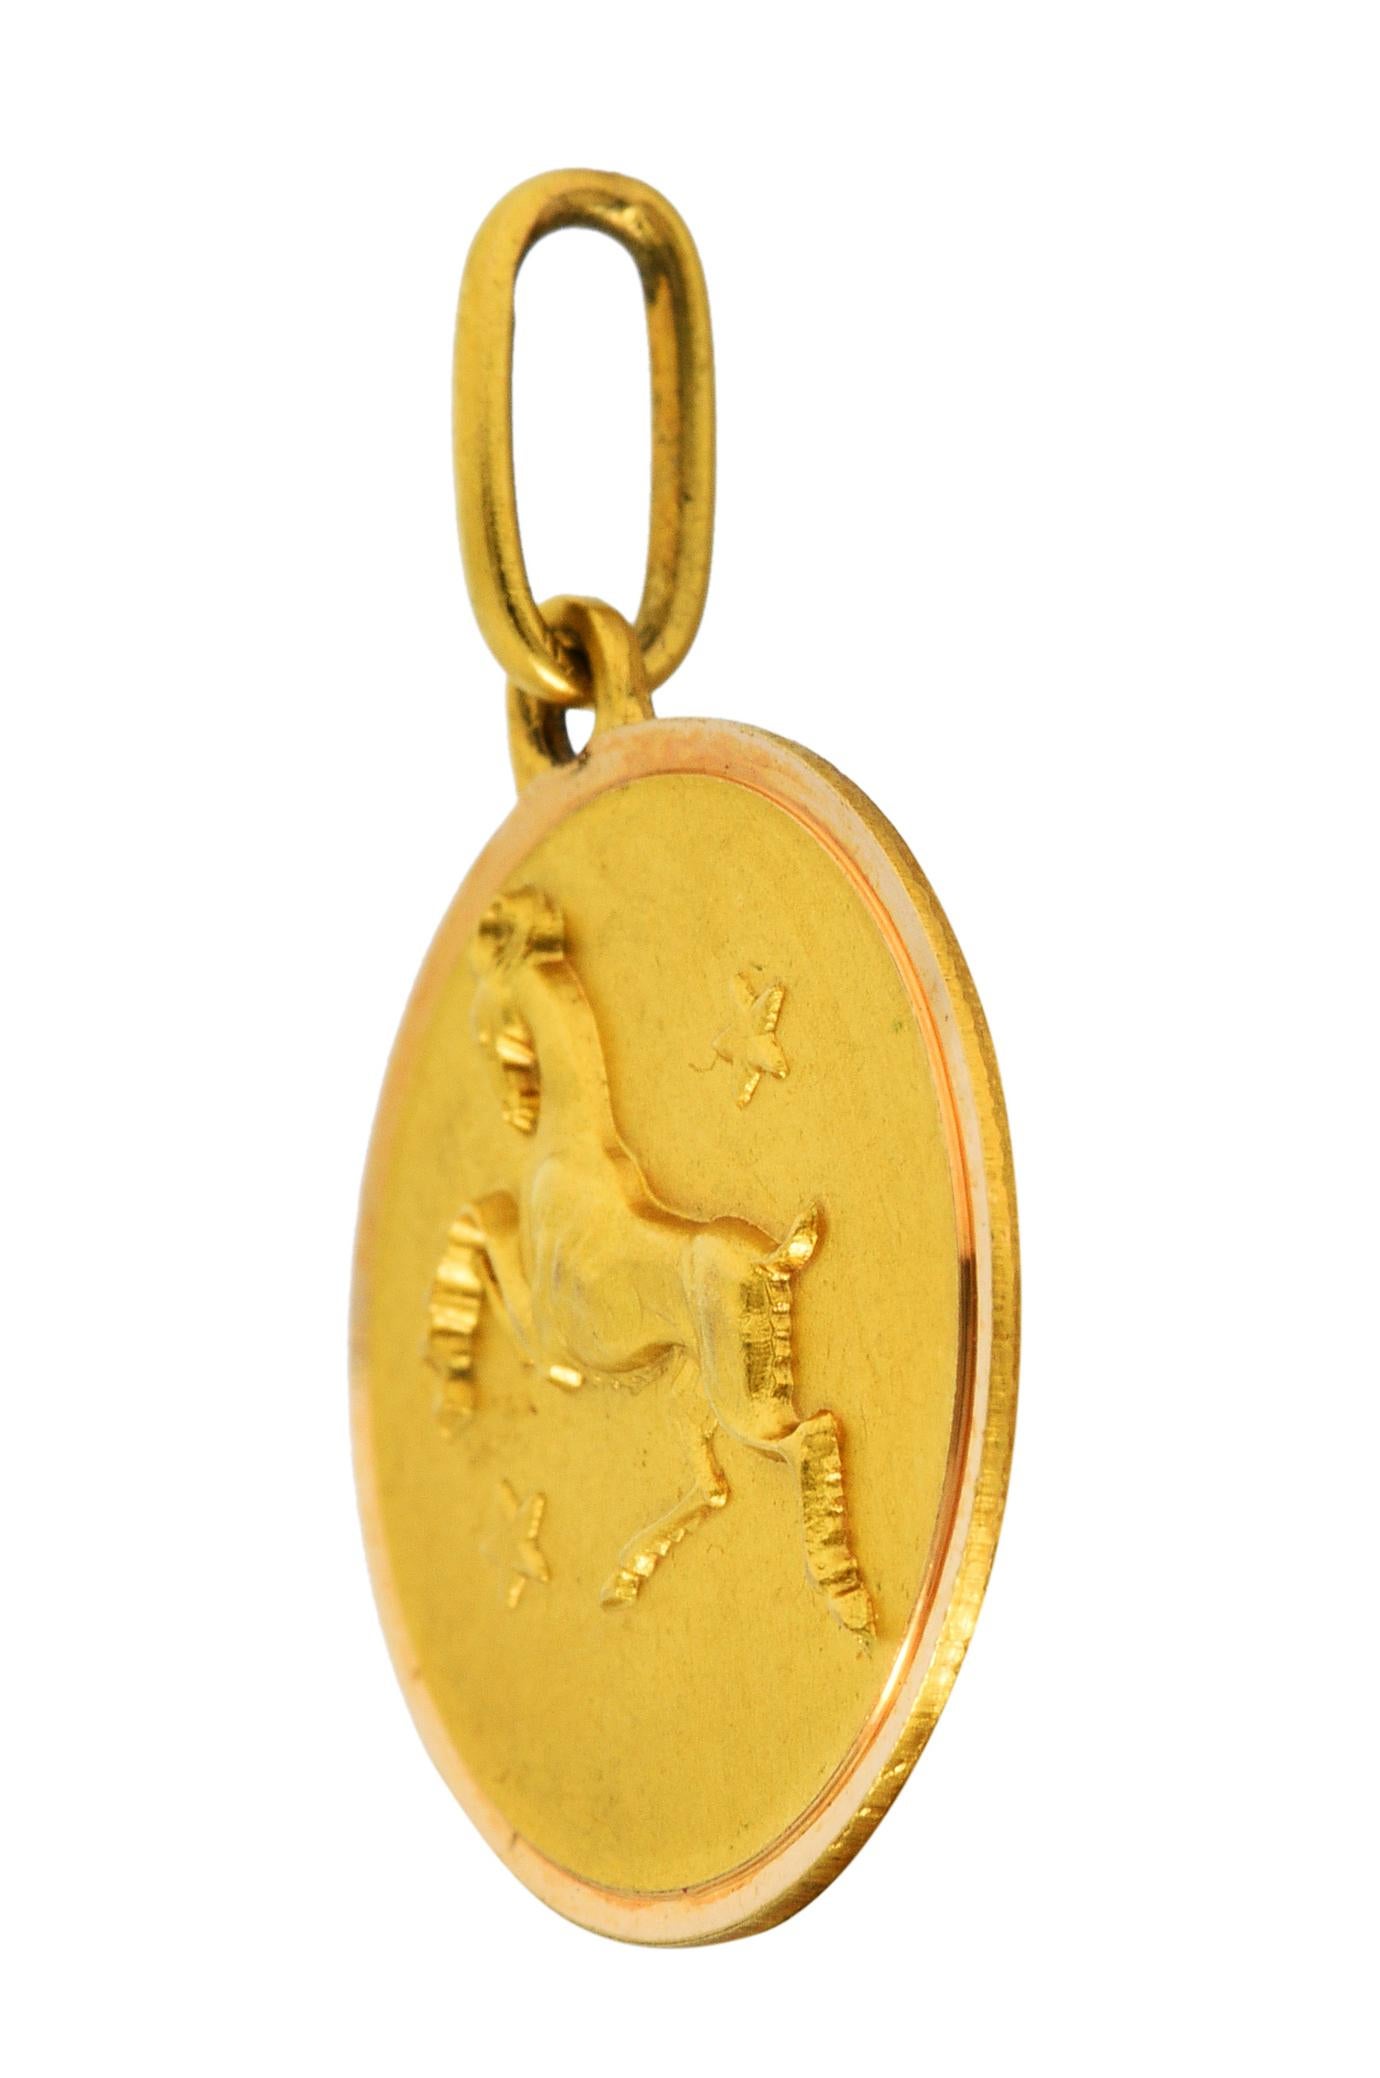 Circular charm has a matte finish and a raised rendering of a ram

Reared on its hind legs and accented by two stars

With a brightly polished border

Italian assay marks for 18 karat gold

Circa: 1970s

Measures: 5/8 x 7/8 inch (including jump ring